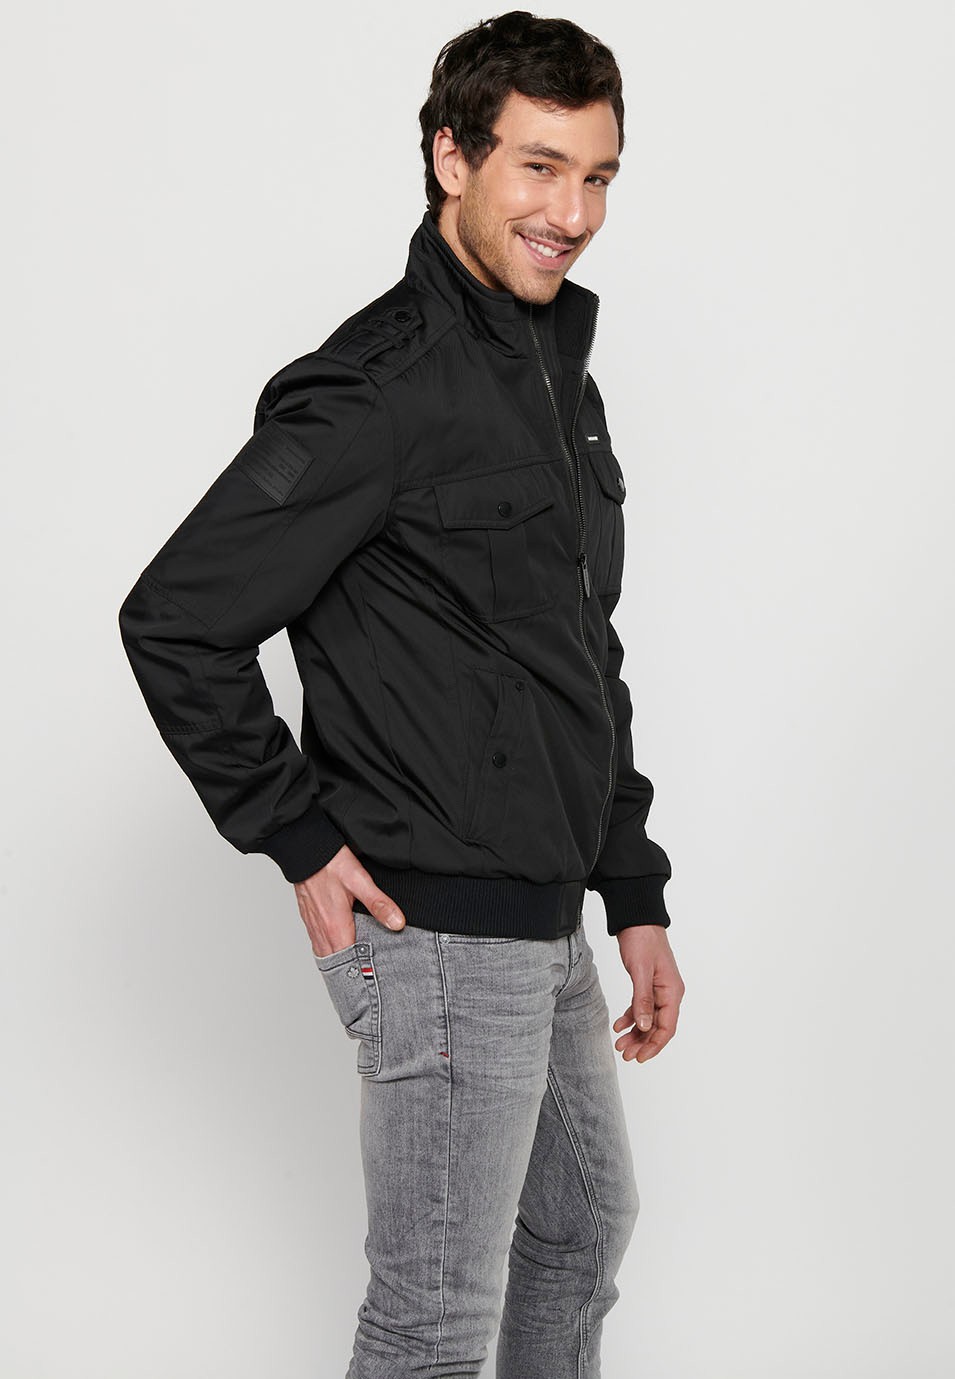 Black Long Sleeve Jacket with Round Neck and Front Zipper Closure with Flap Pockets for Men 5